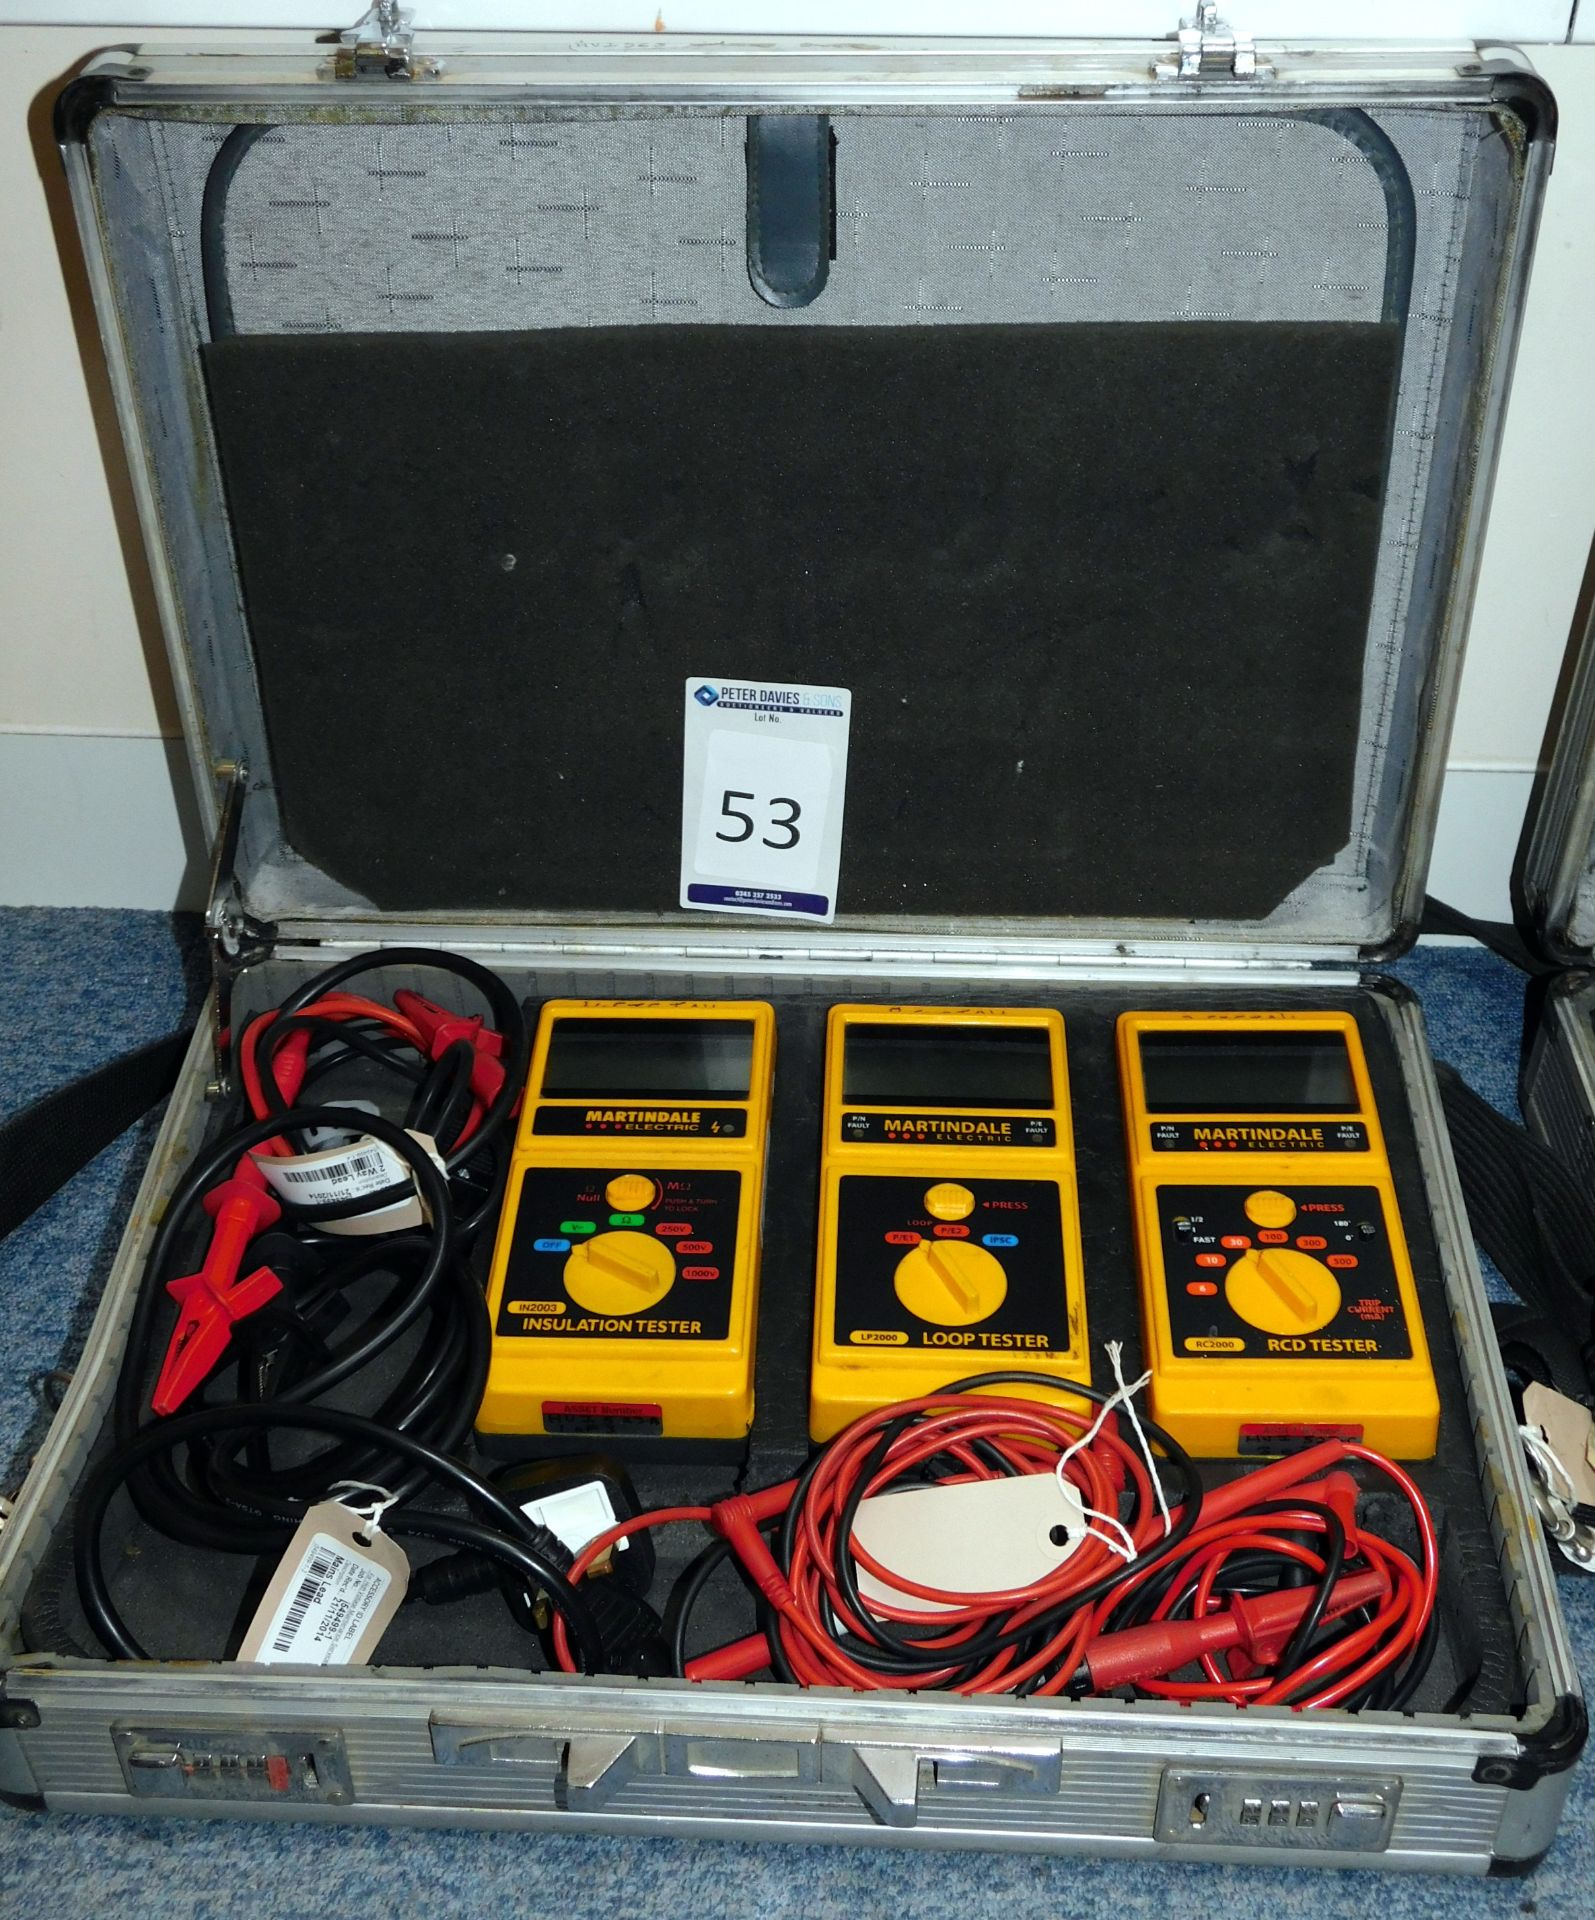 Martindale Test Set to include IN2003 Insulation Tester, LP2000 Loop Tester & RC2000 RCD Tester